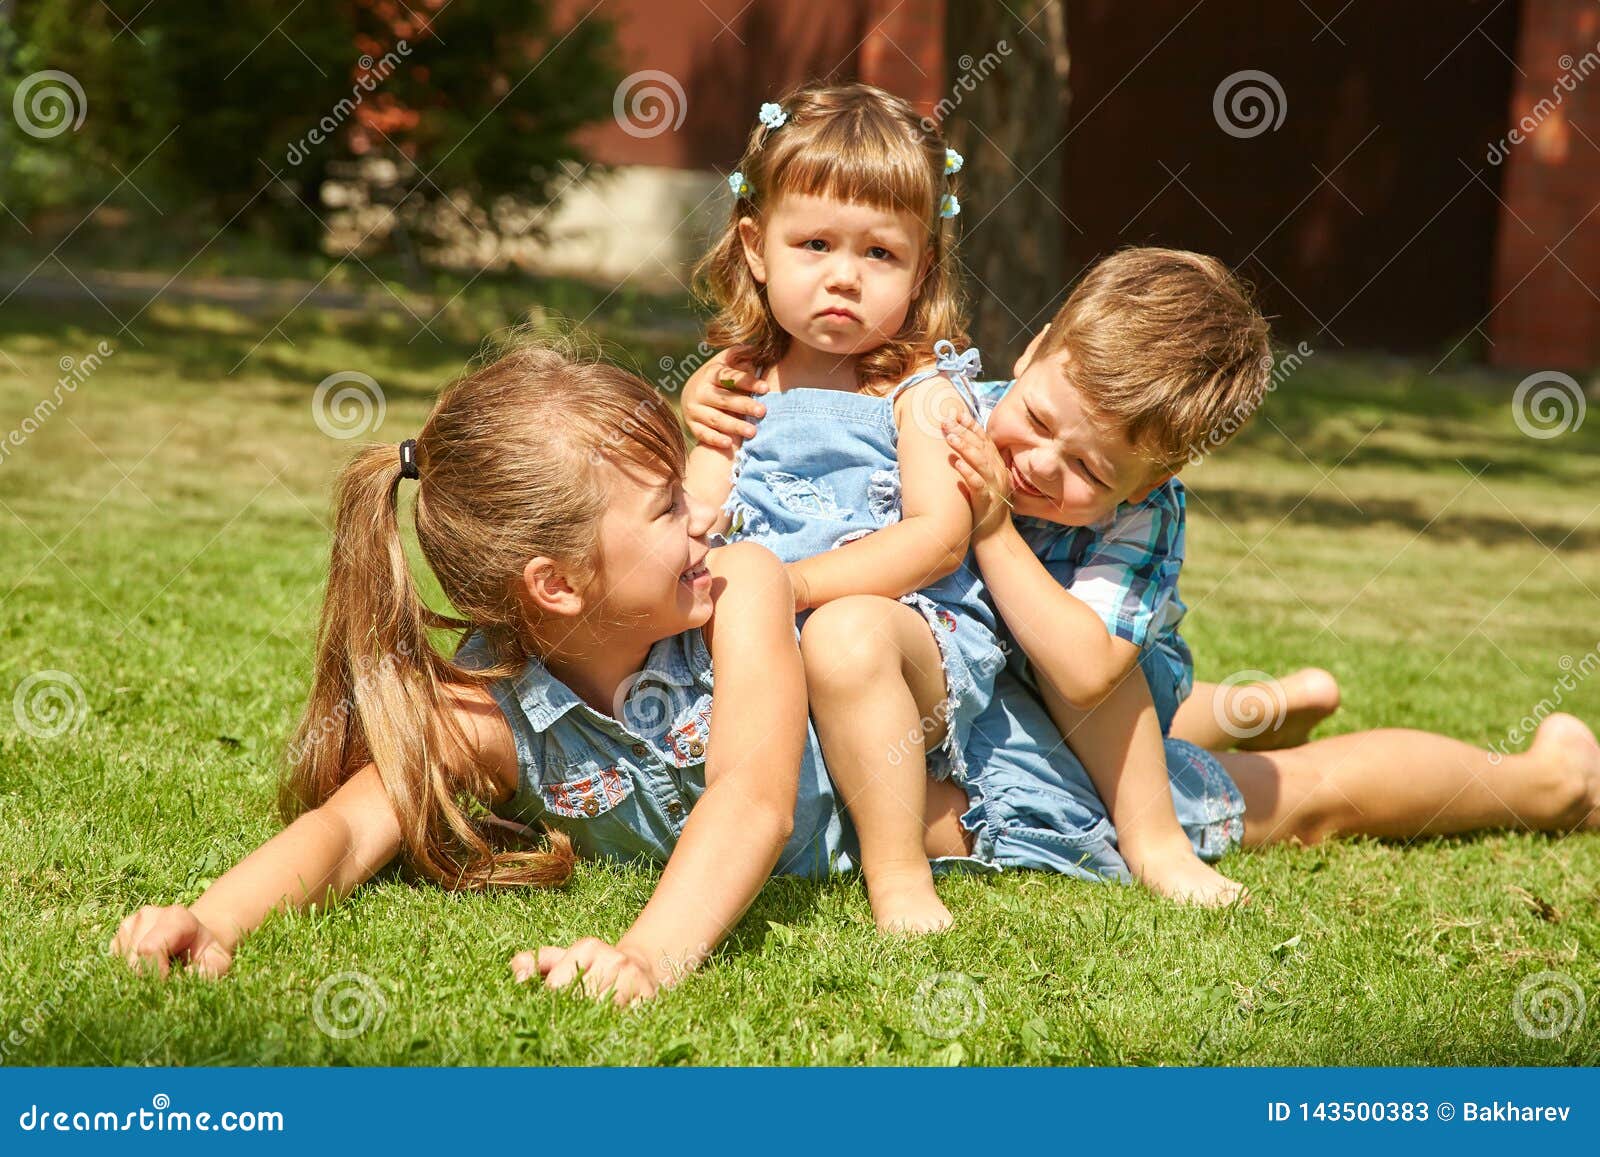 Playful Children Outdoors in the Summer on the Grass in a Backyard